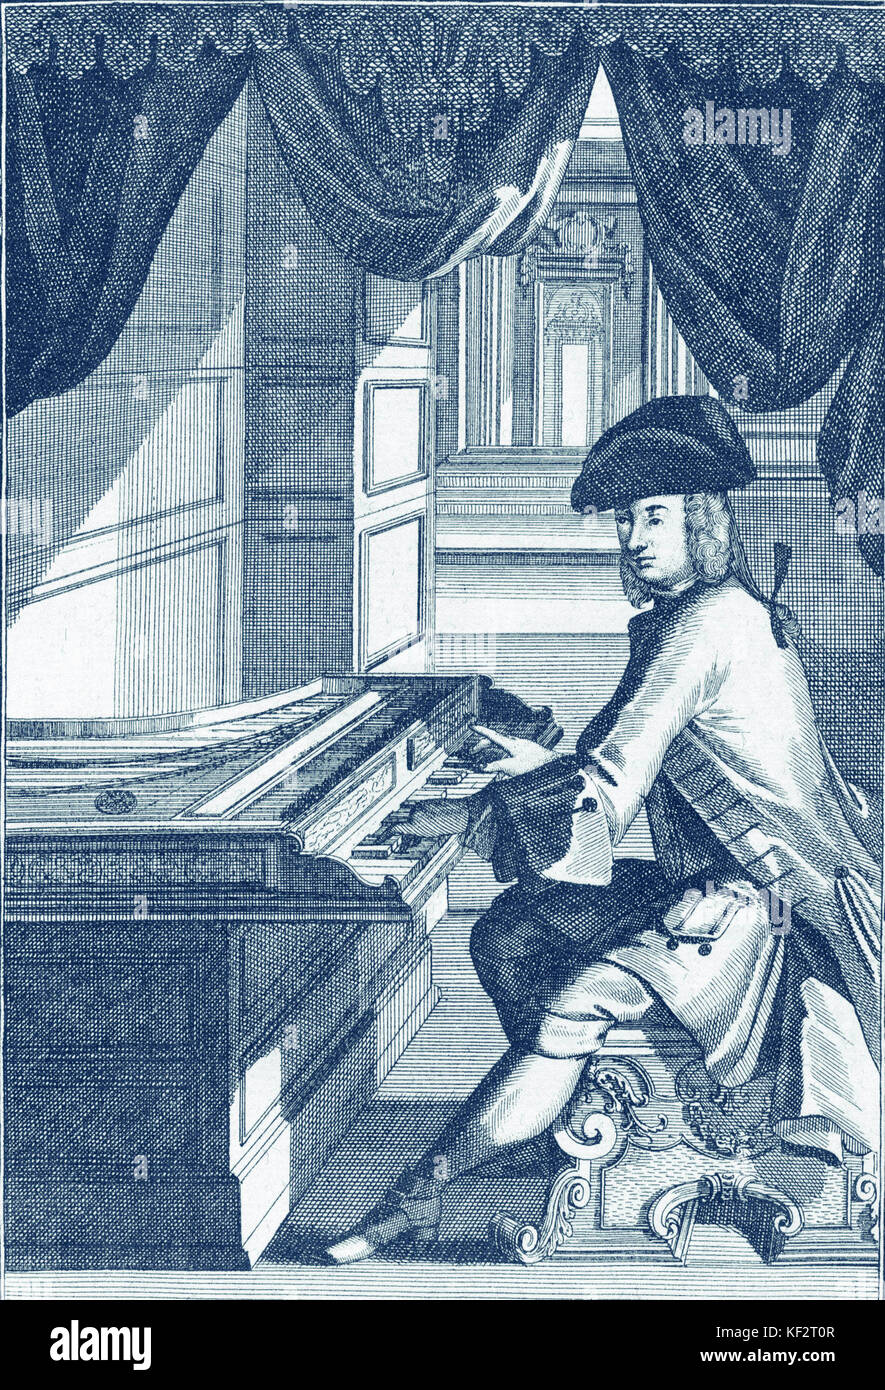 Harpsichord player. Engraving by J.C. Weigel (1661-1726) from 'Musicalisches Theatrum'. Glavicimbal (Clavicymbal), ie. keyed dulcimer or harpsichord Stock Photo